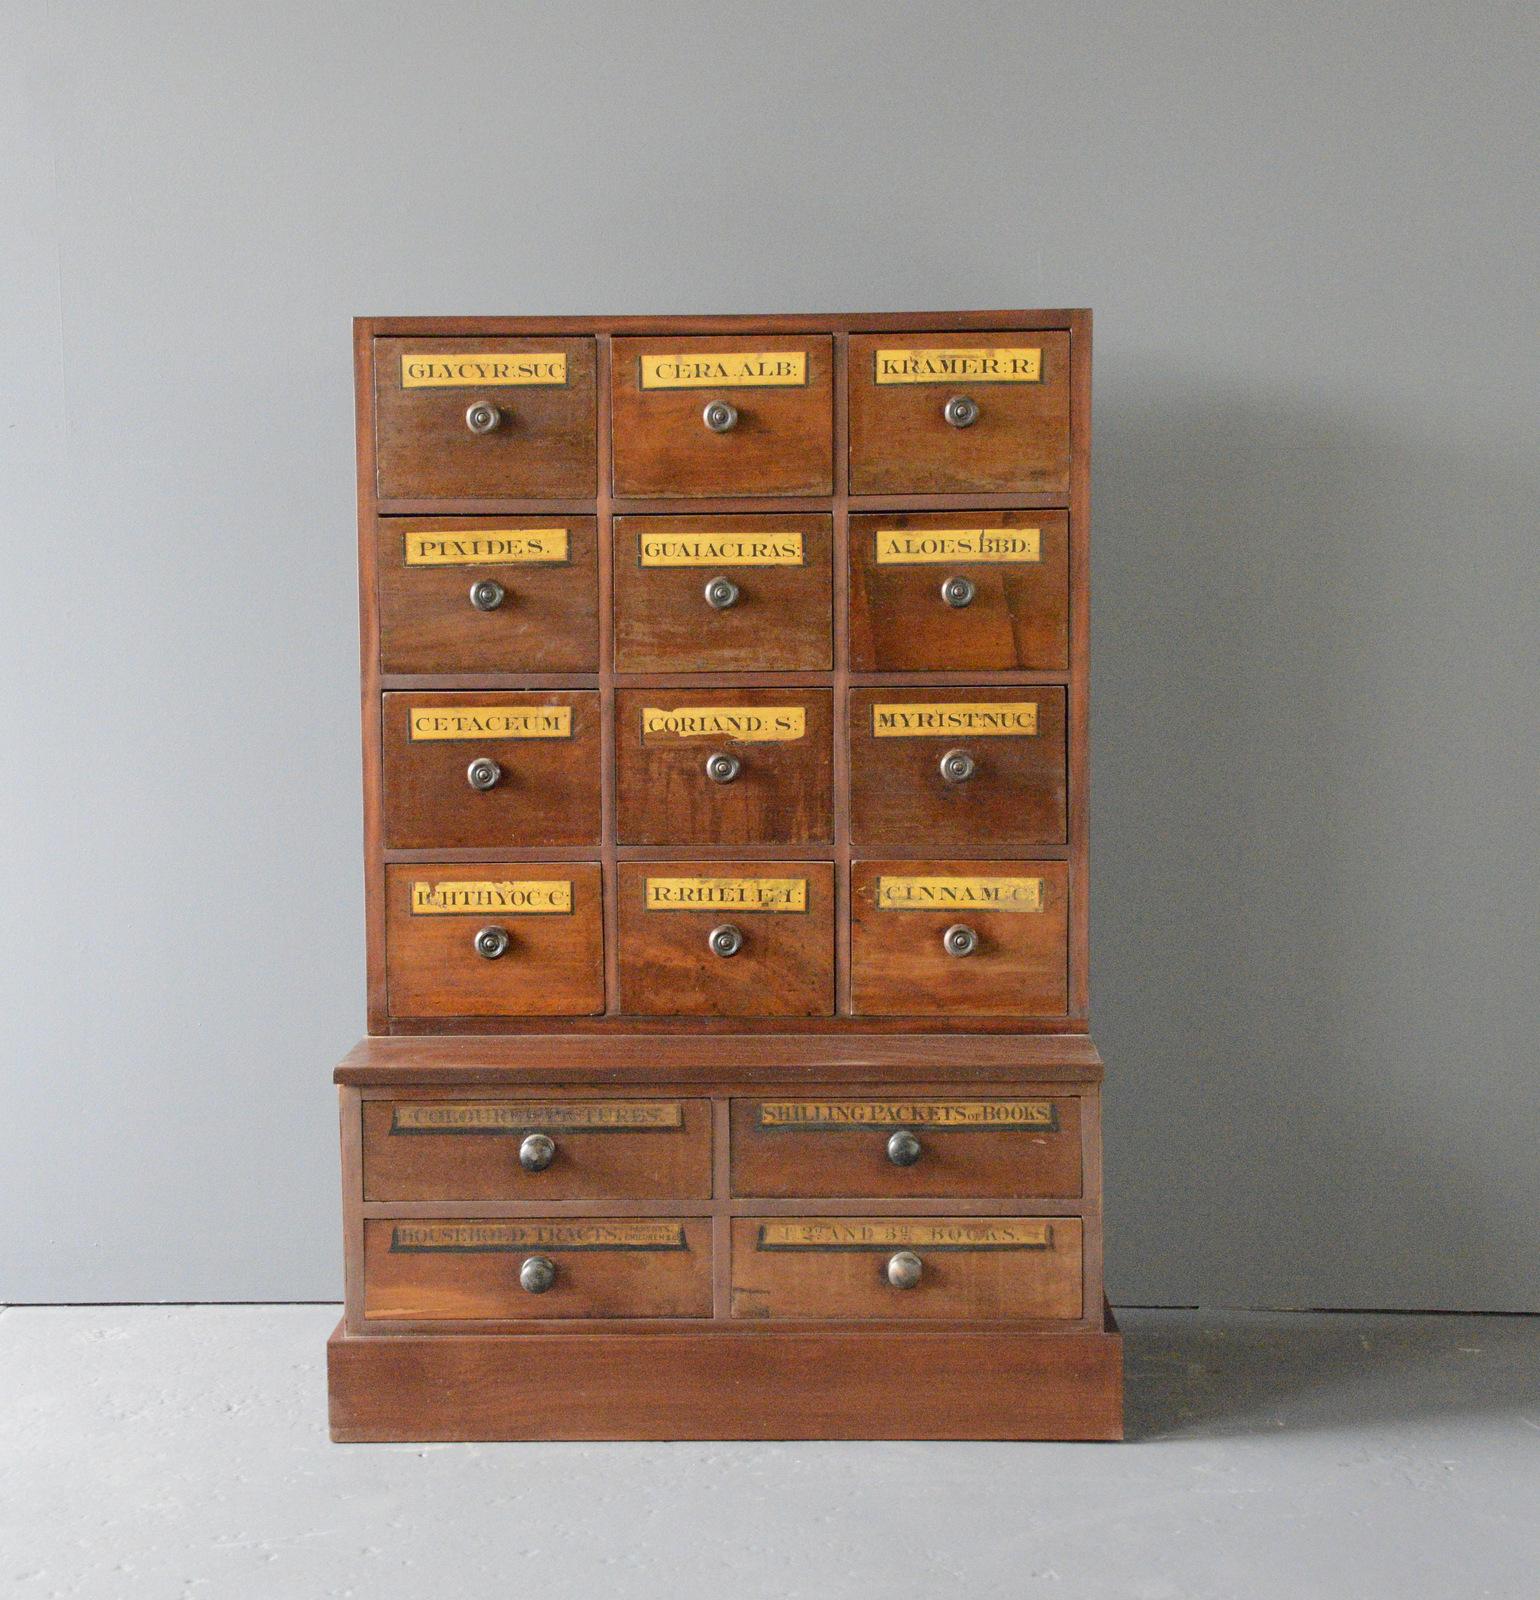 Early 20th century Apothecary Drawers circa 1910

- Mahogany drawers
- Wooden handles
- Original gold leaf labels 
- English ~ 1910
- 94cm wide x 53cm deep x 140cm tall

Condition Report

Fully restored, some very minor cosmetic wear.